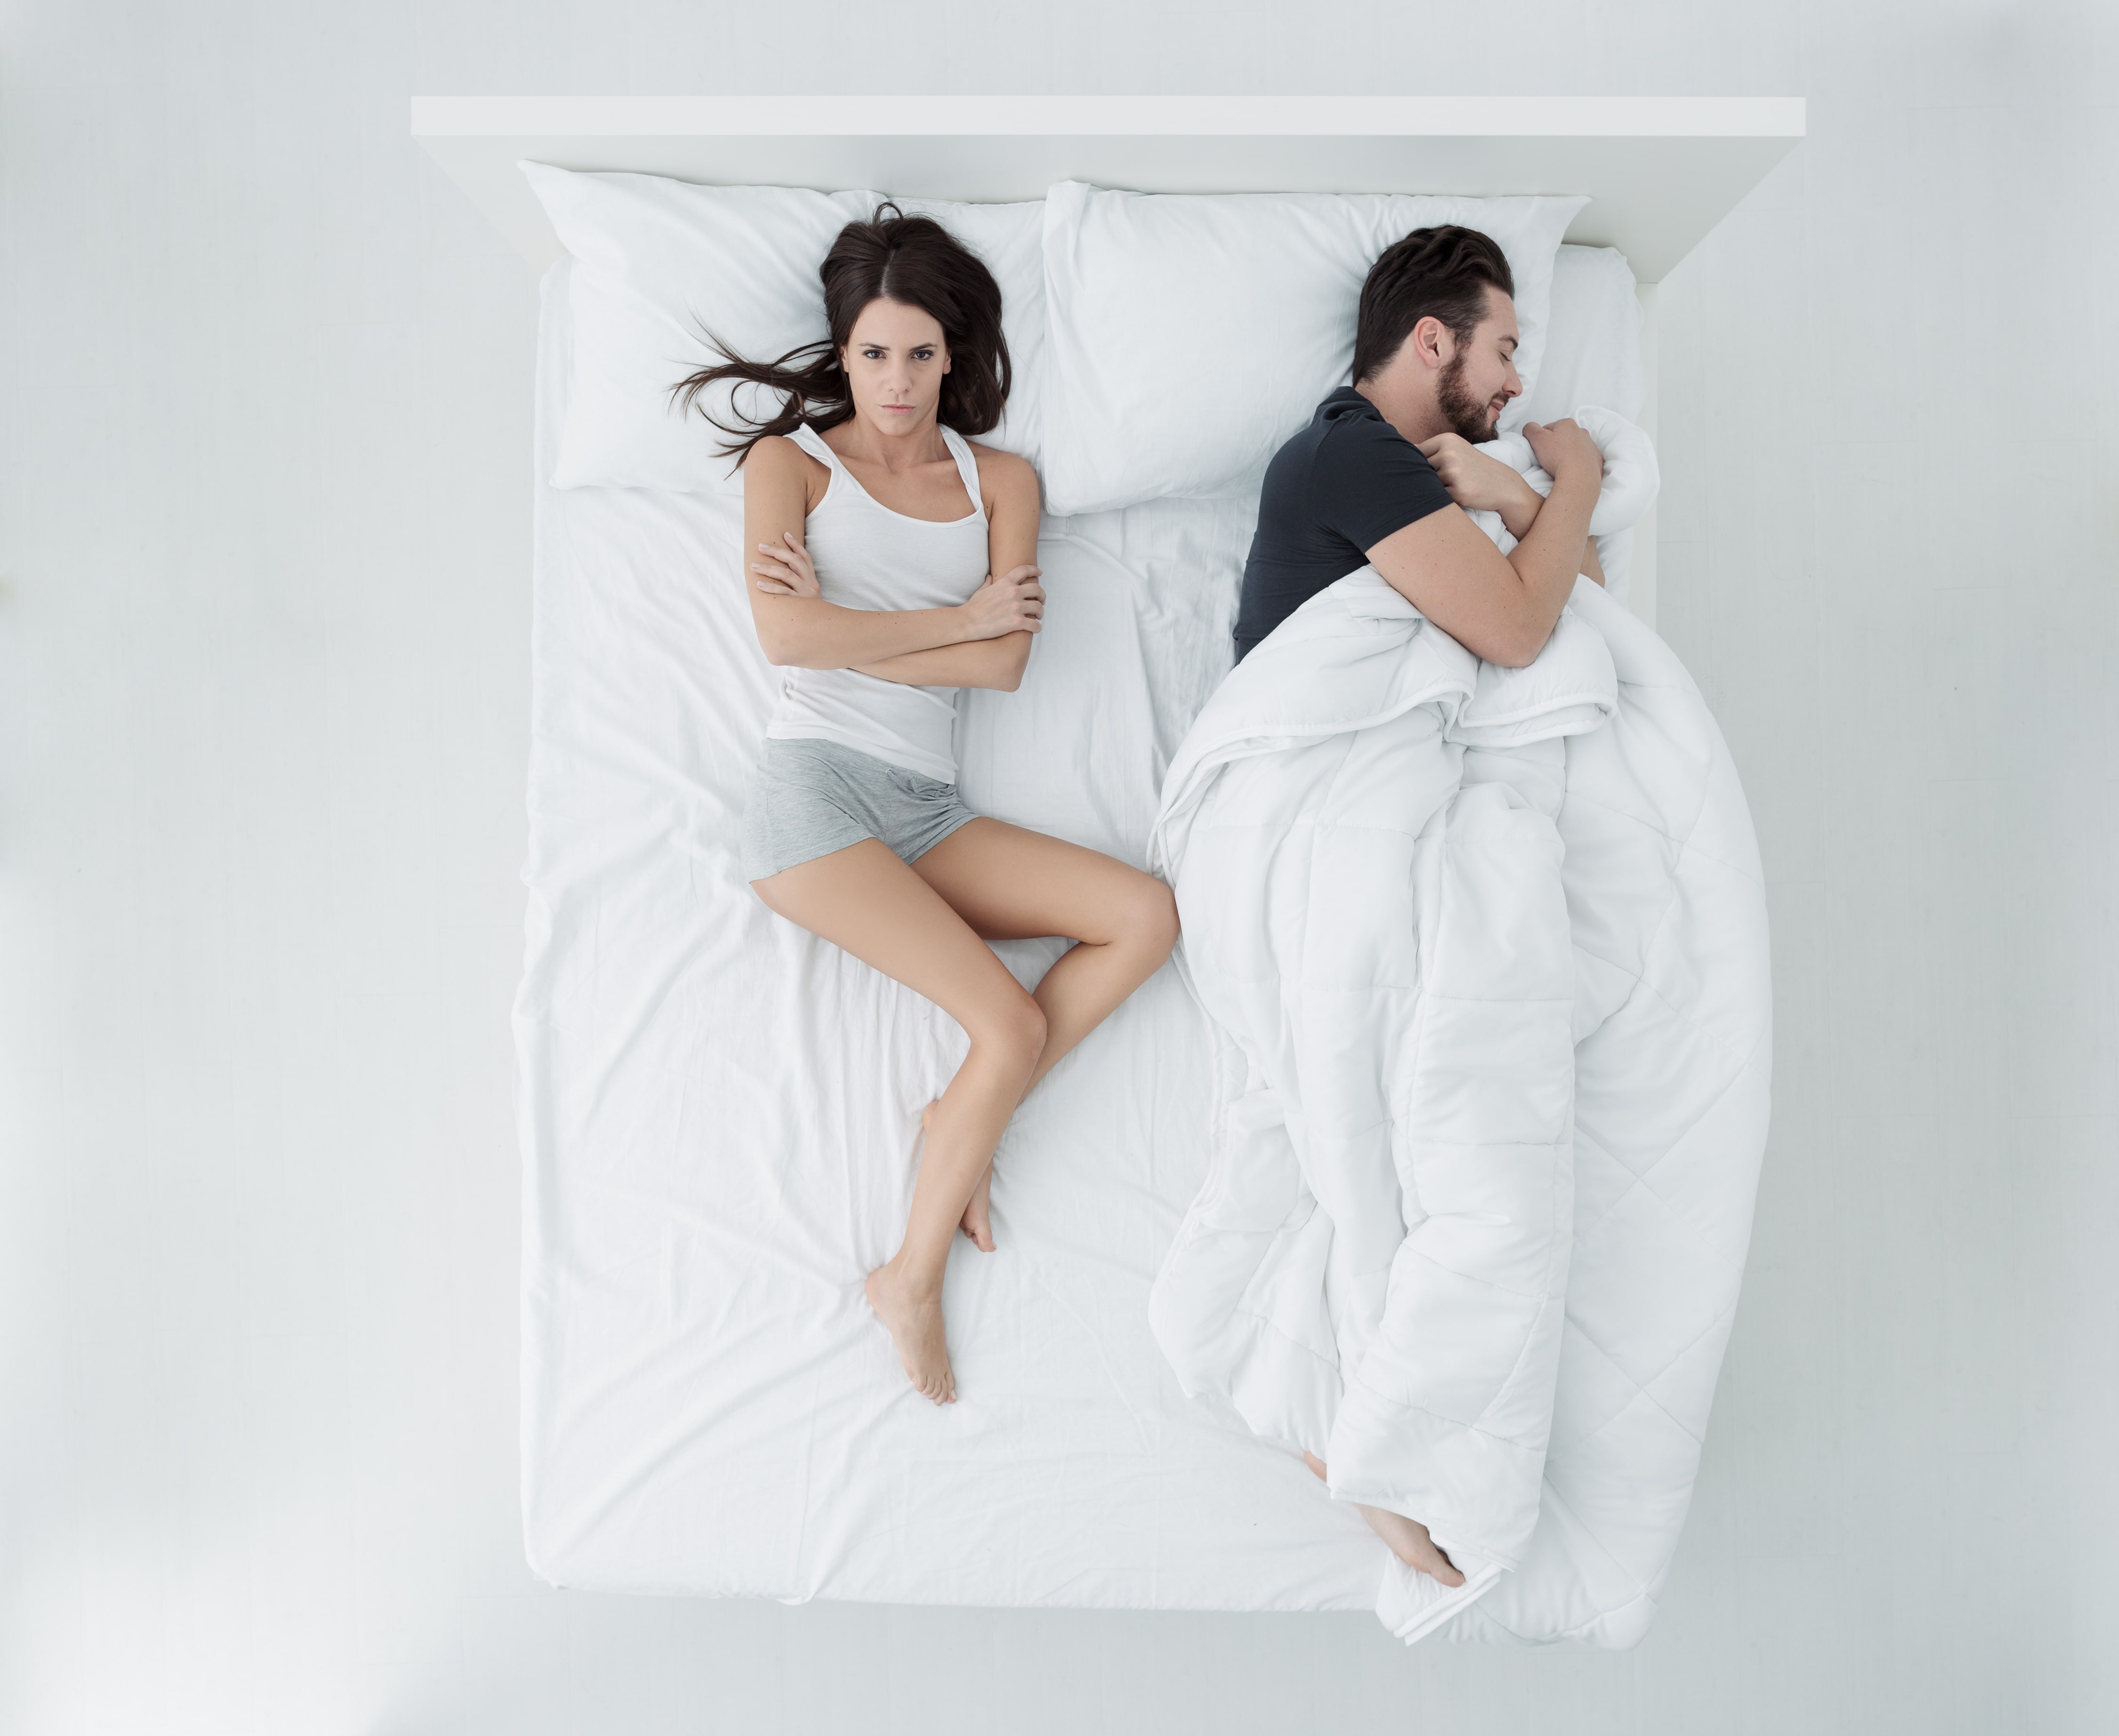 Man and woman in bed. Man is sleeping wrapped in a duvet and woman looks angry as she isn't covered by any of the duvet.